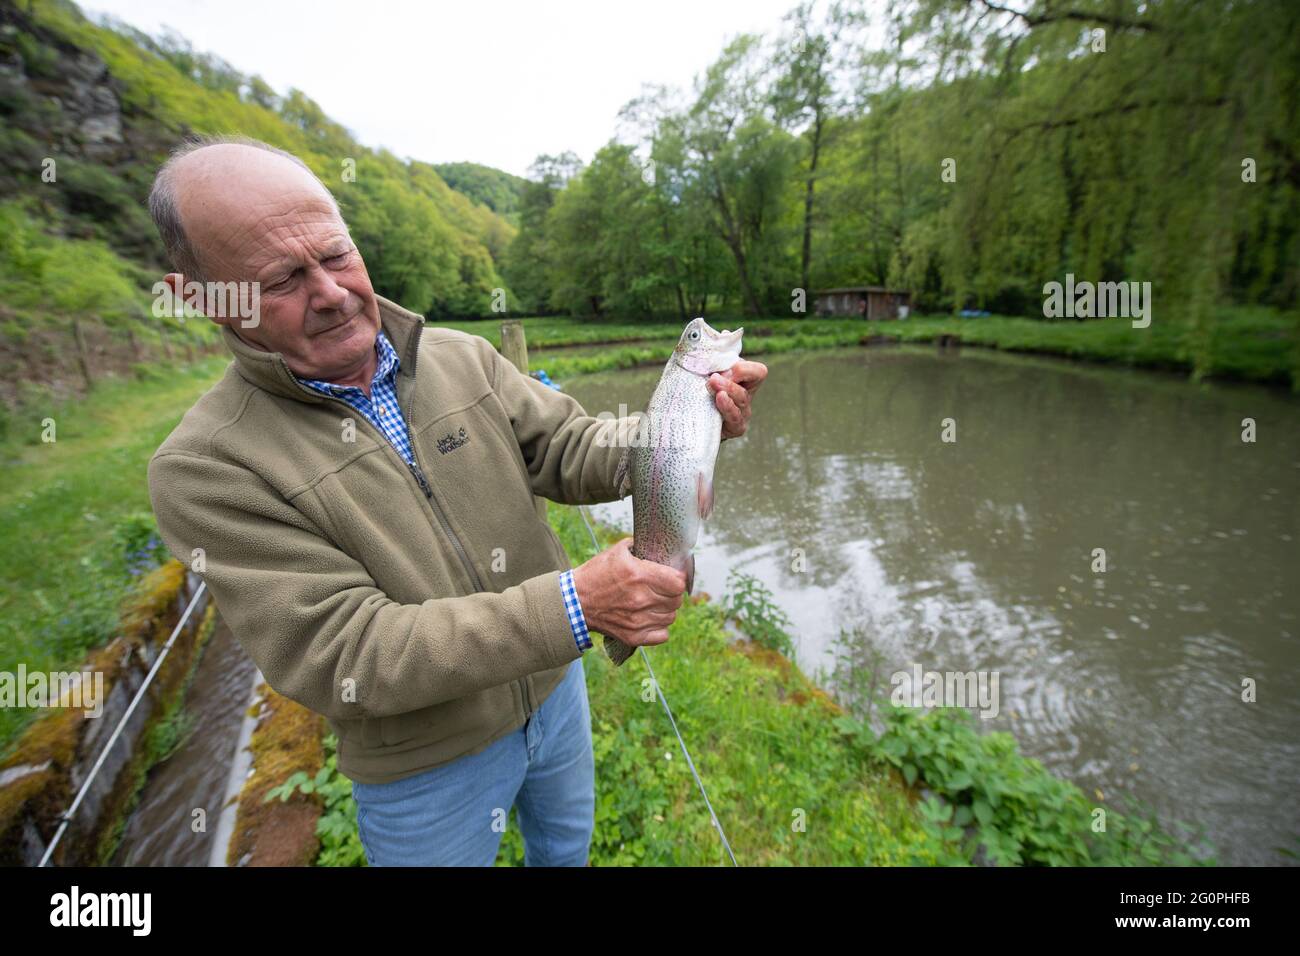 https://c8.alamy.com/comp/2G0PHFB/lorch-germany-28th-may-2021-siegbert-seitz-checks-the-condition-of-a-salmon-trout-deep-in-the-wispertal-near-lorch-in-the-rheingau-he-produces-around-100000-fish-a-year-on-his-trout-farm-as-a-result-of-the-corona-related-lockdown-the-family-business-lost-a-large-part-of-its-sales-market-in-the-gastronomy-sector-within-a-very-short-time-to-dpa-farms-with-direct-marketing-losers-and-profiteers-of-the-crisis-from-03062021-credit-boris-roesslerdpaalamy-live-news-2G0PHFB.jpg